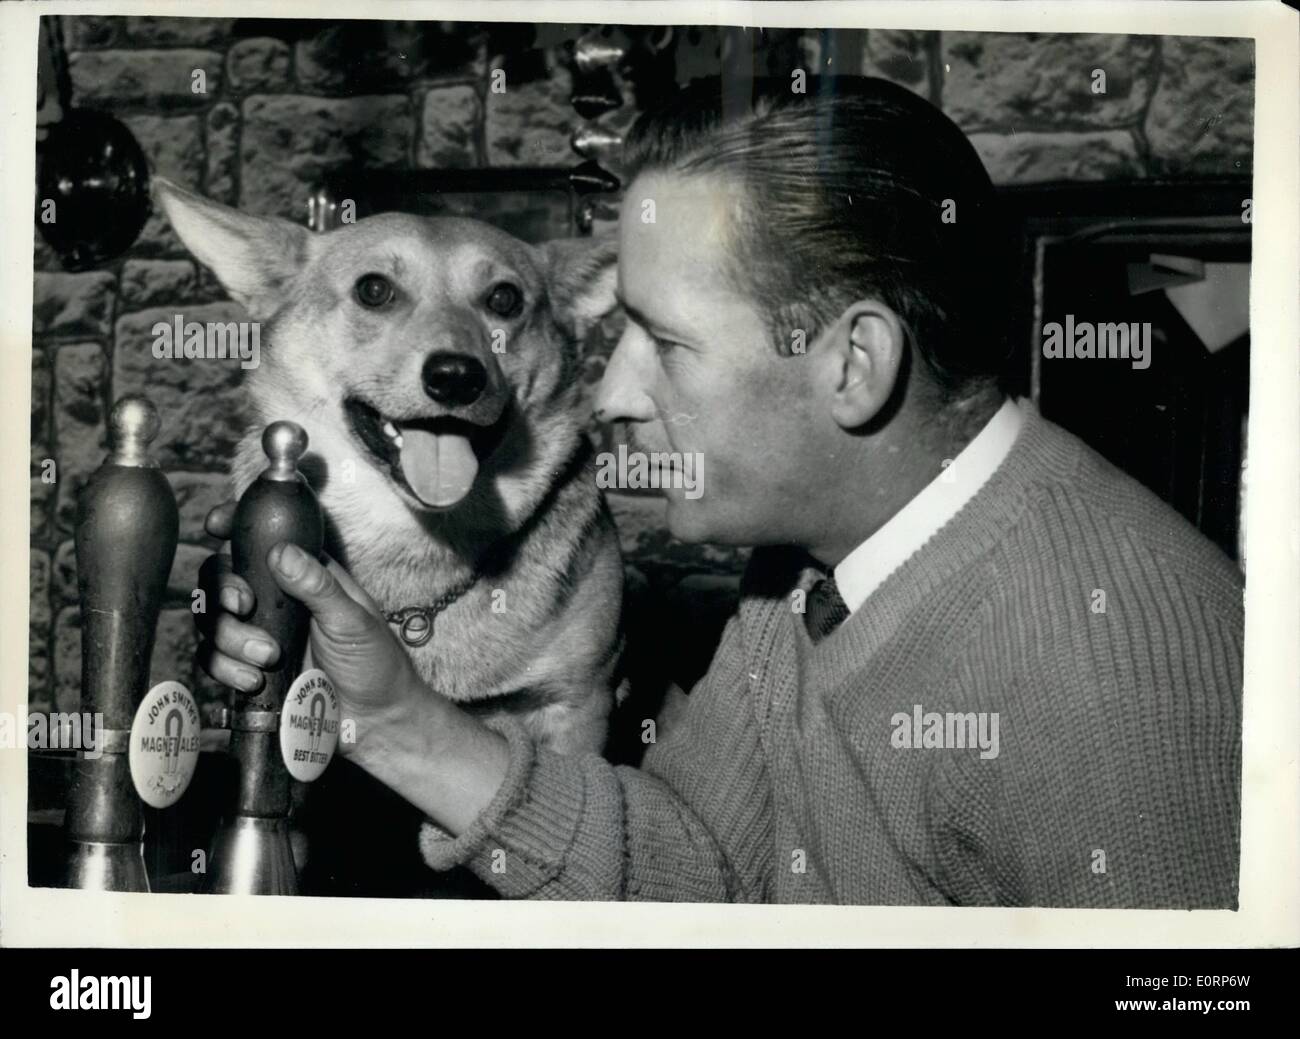 Apr. 04, 1960 - ''I'm a Clever Lad'' Says Corky - The Talking Corgi. The regulars at the ''Spotted Cow'' Public House, Drighlington, near Leeds, are used to hearing ''Corky'', the talking Corgi dog. Mr. Bernard Bucknall, who always greeted him with ''Good Morning'', was simply shattered to hear ''Corky'' say it right back. since then Corky has learned a number of other phrases such as ''He's gone'', and some which are not printable. The Dog is owned by Mr. May Dunsworth, and Mr. Bucknell has appointed himself Corky's tender. Keystone Photo Shows: ''Corky'' and his coach - Mr Stock Photo